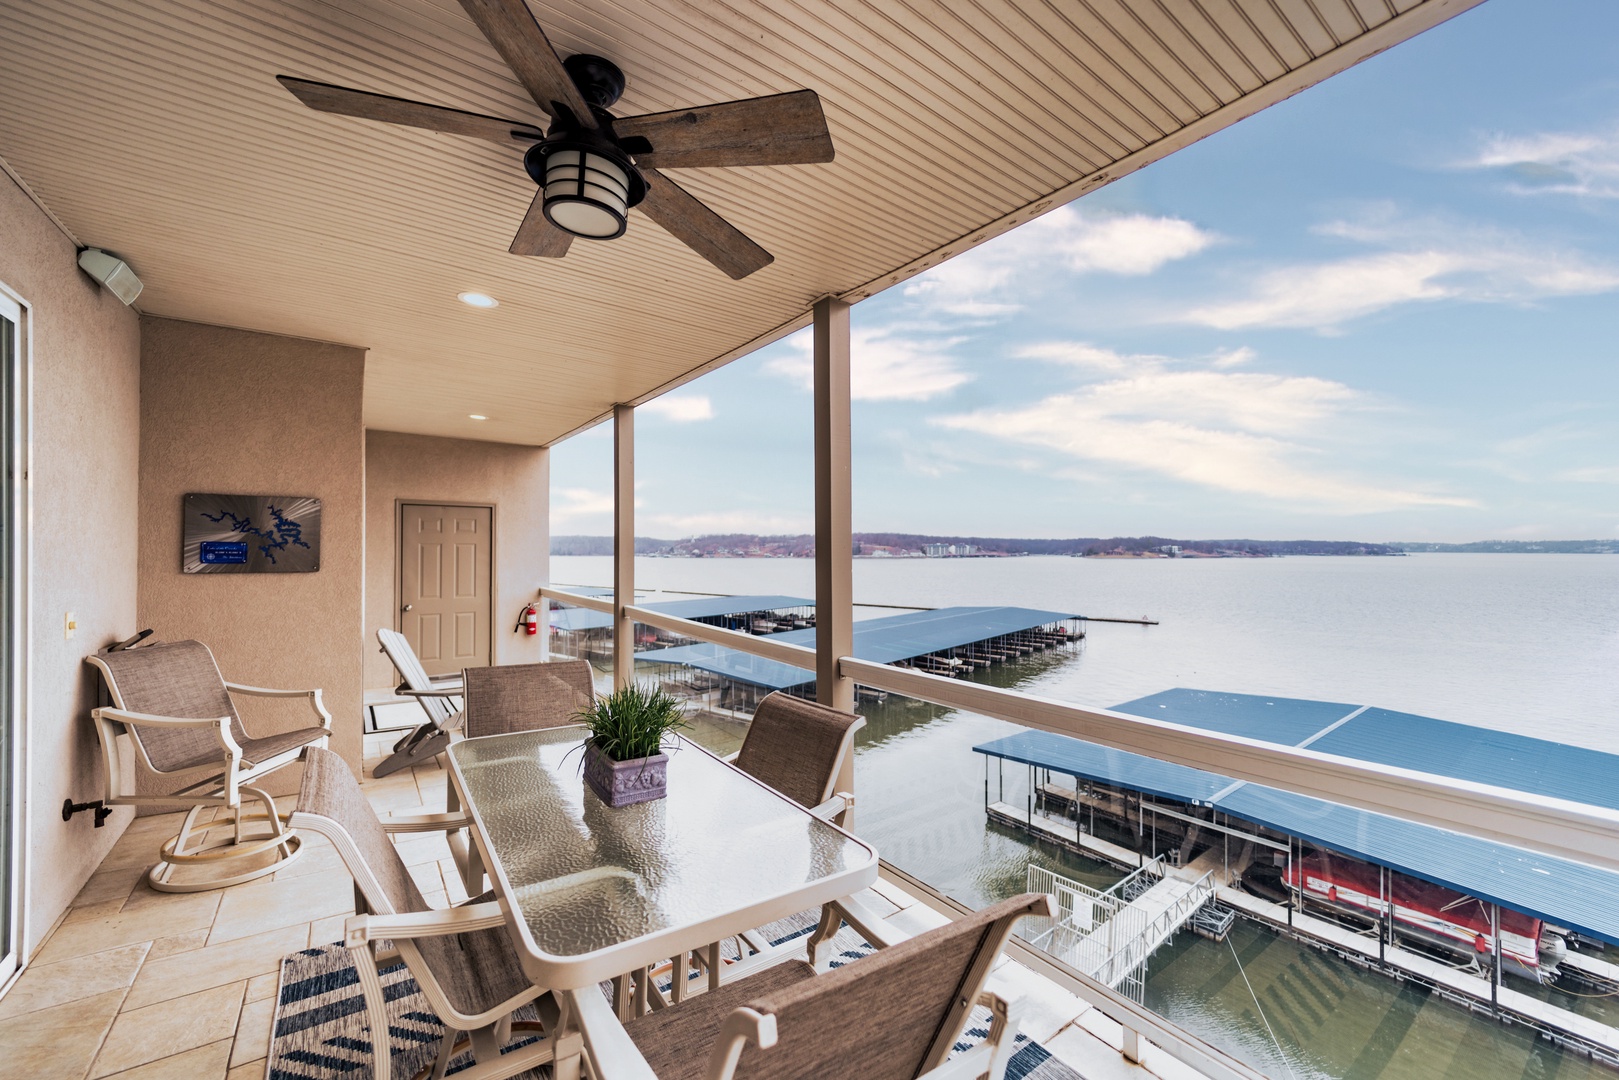 Lounge the day away with stunning water views on the balcony